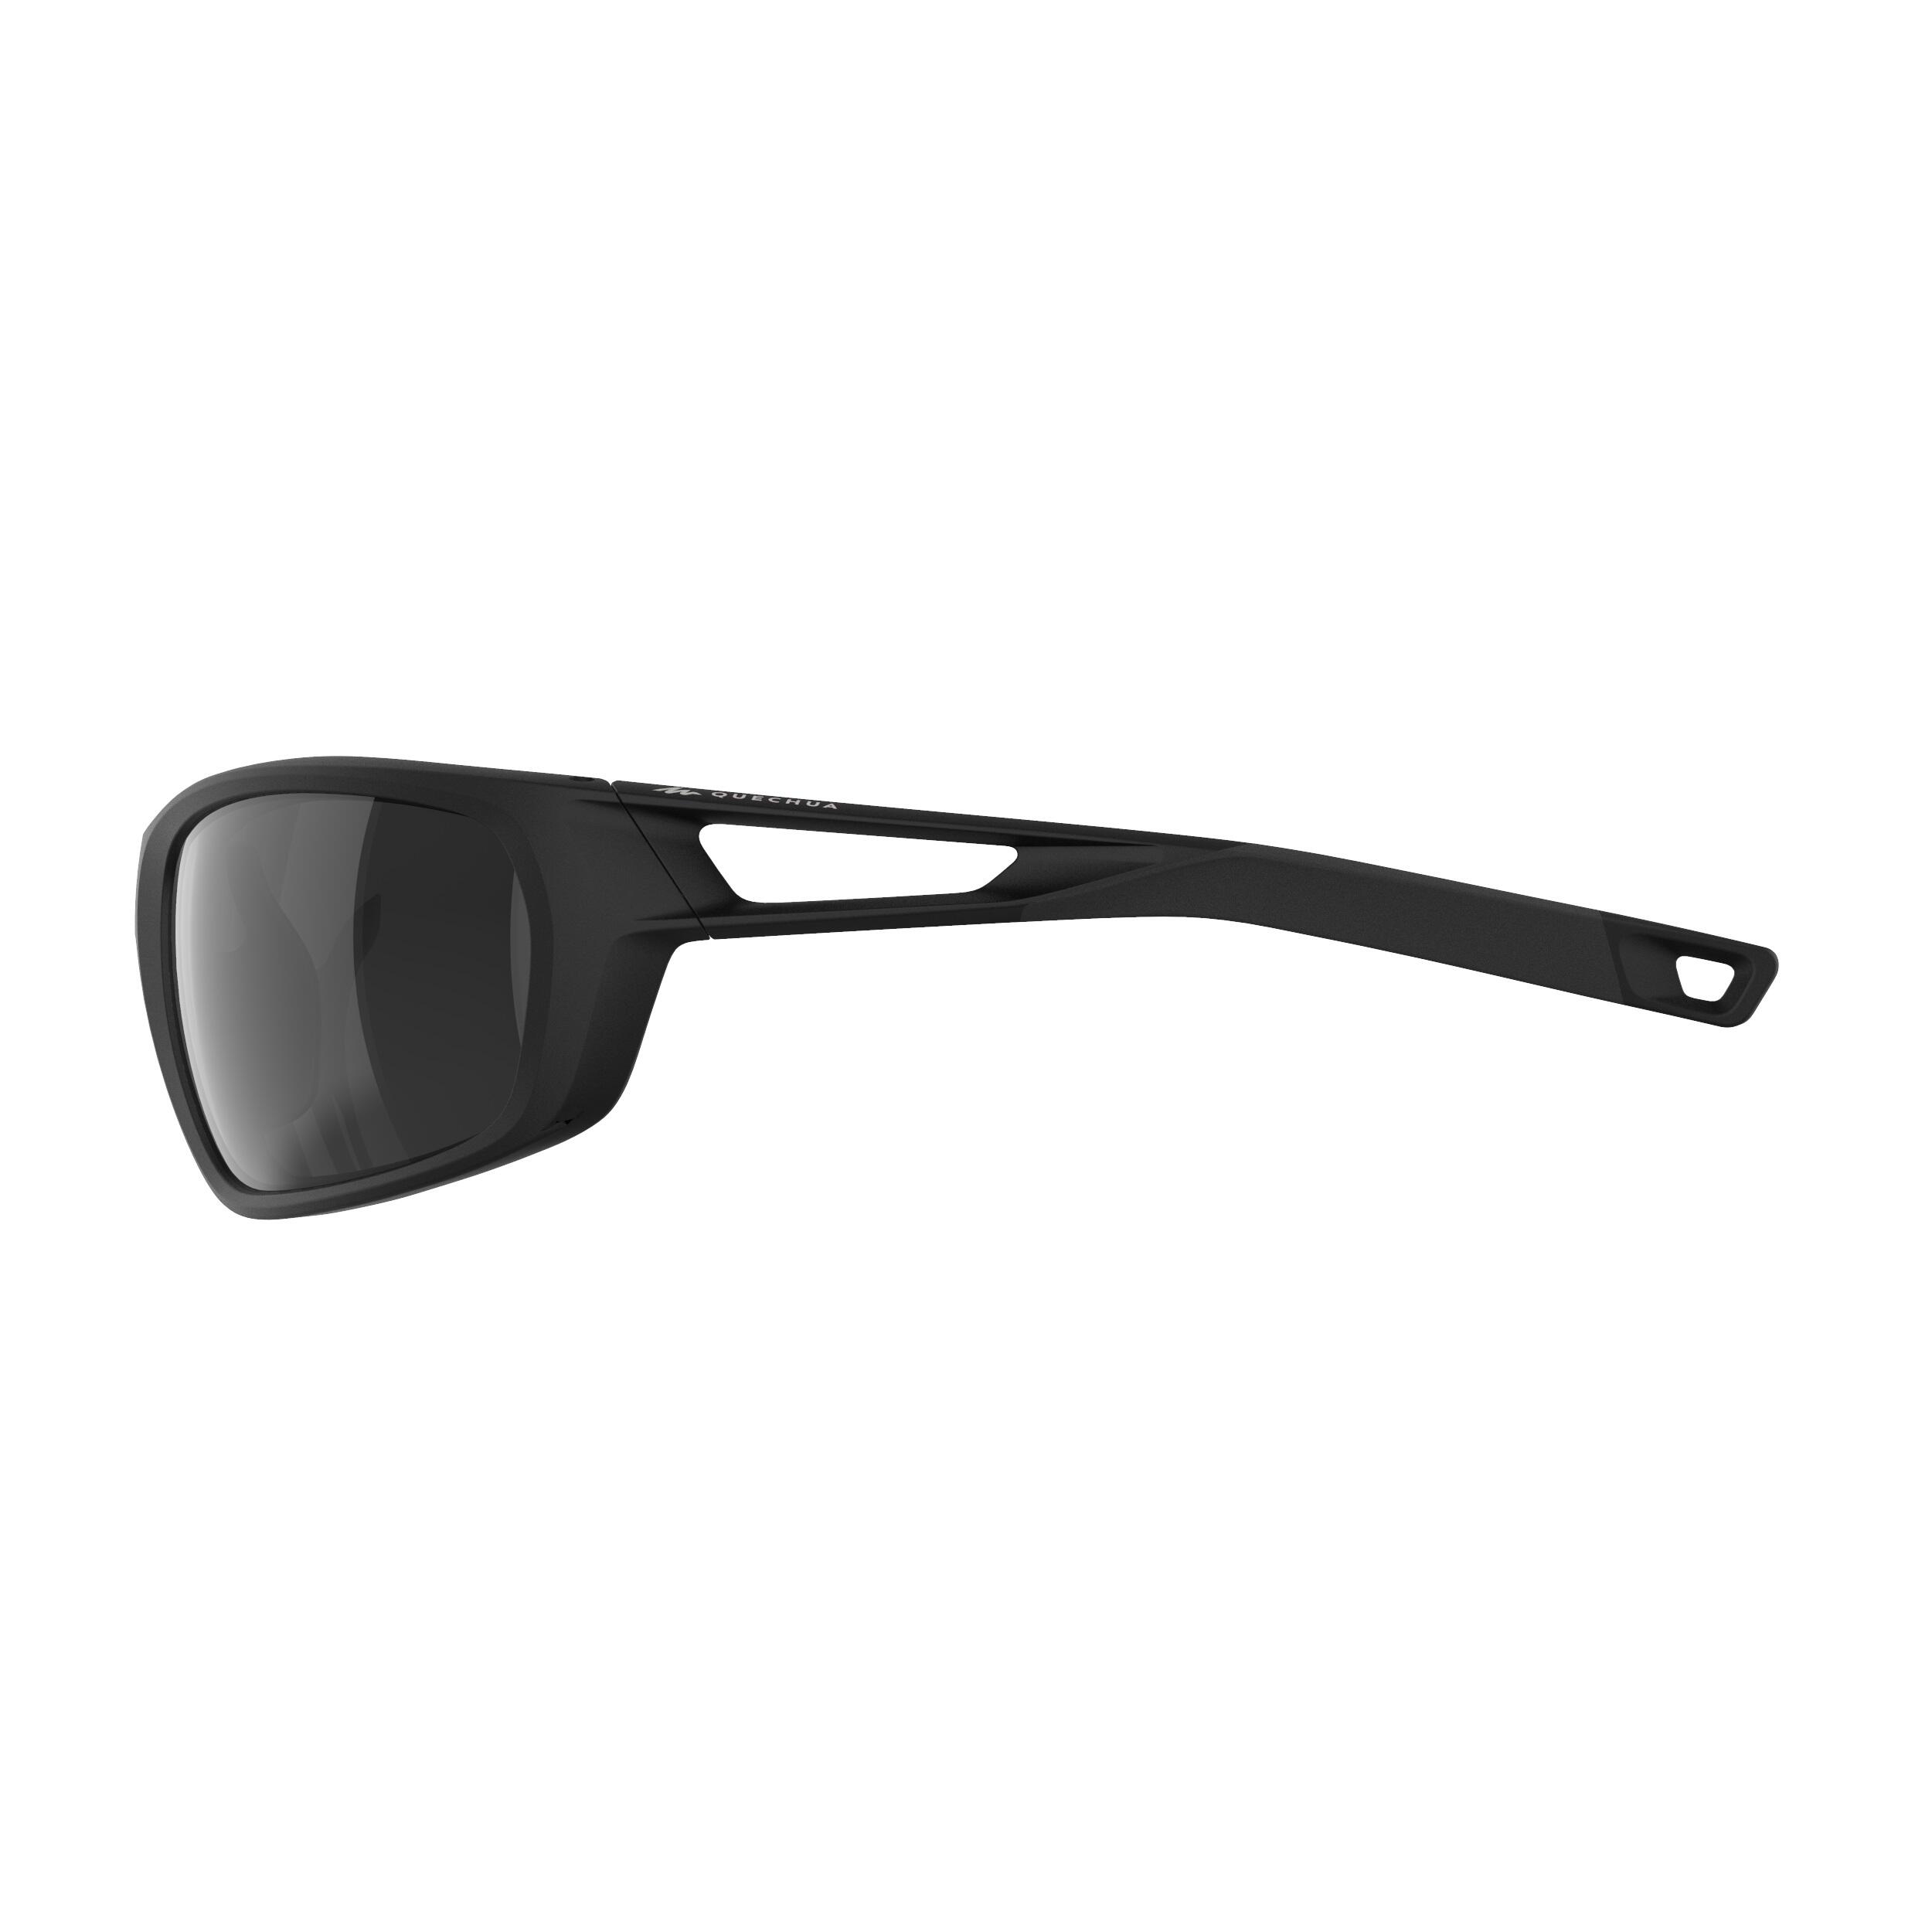 ADULT HIKING SUNGLASSES FOR YOUR EYESIGHT - MH580 - POLARISED CATEGORY 3 4/4